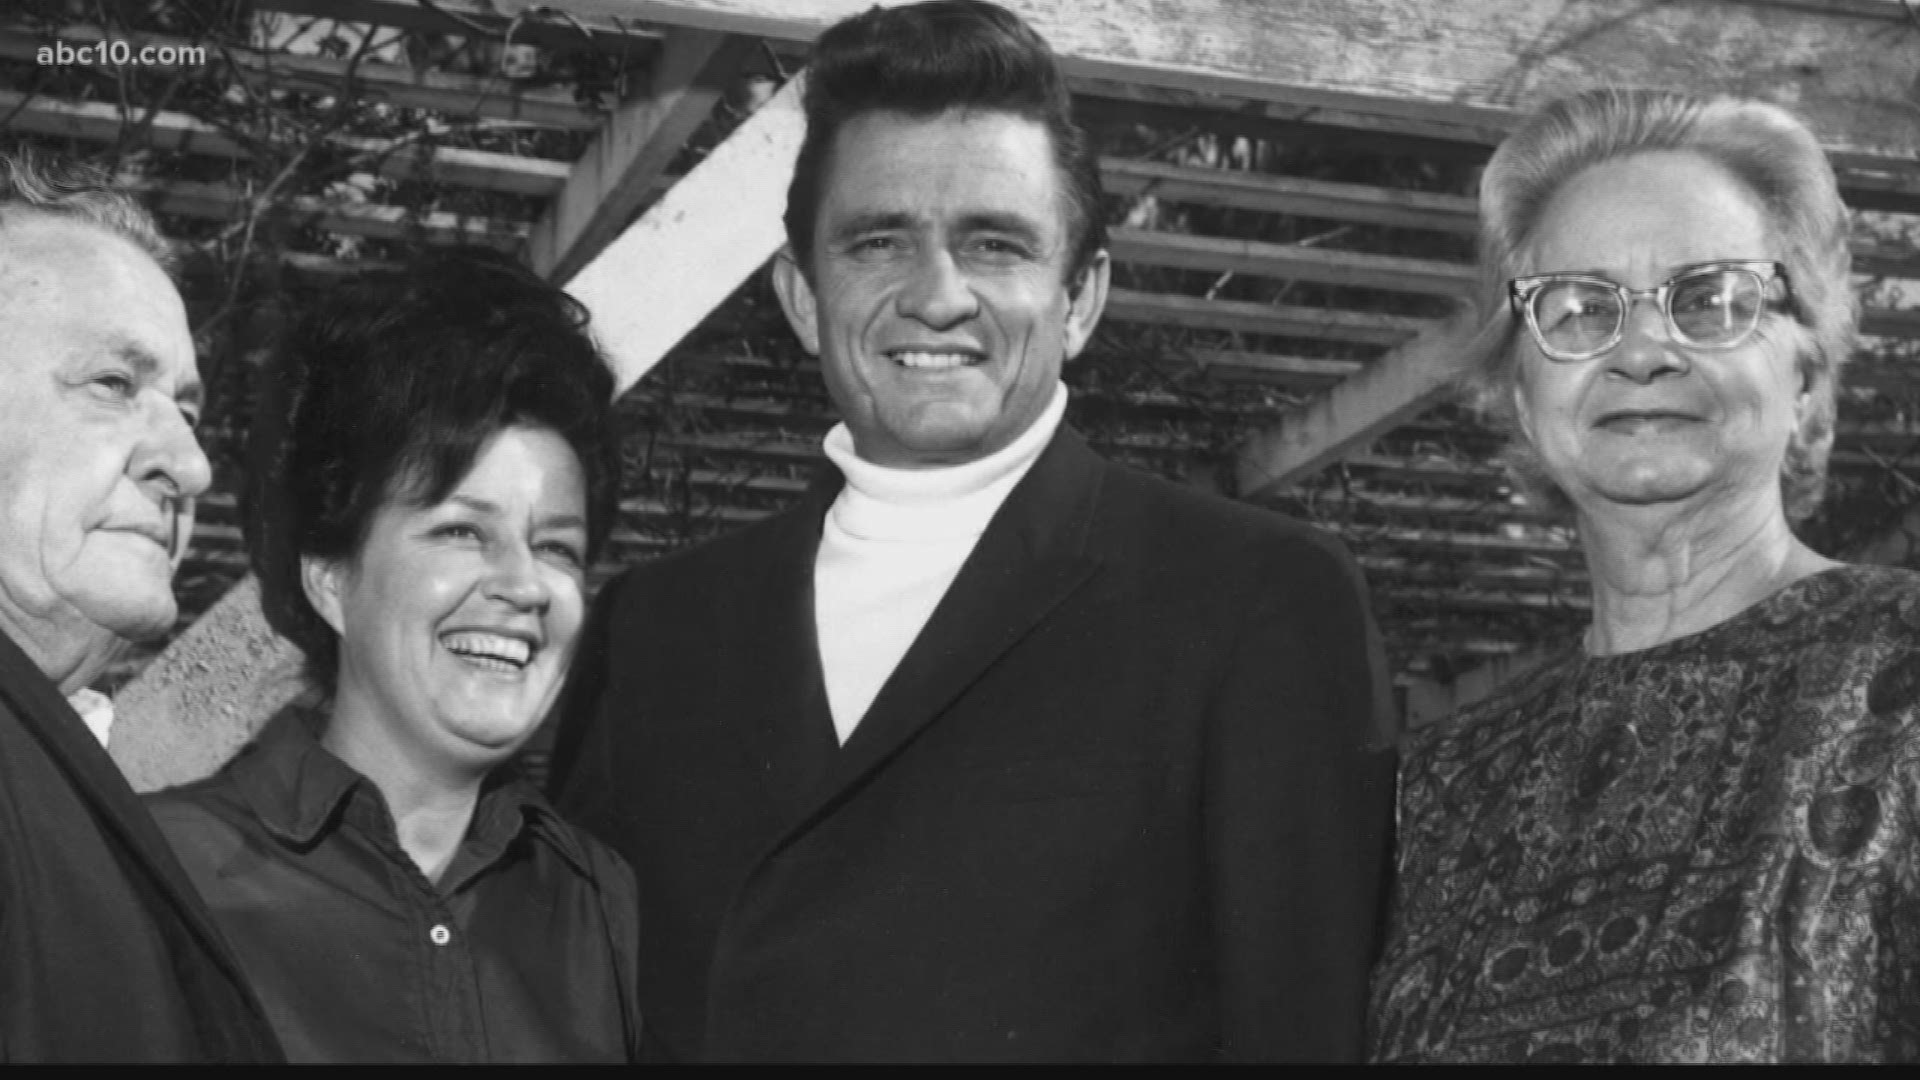 Looking back at Johnny Cash's concert at Folsom State Prison, 50 years later (January 12, 2018)